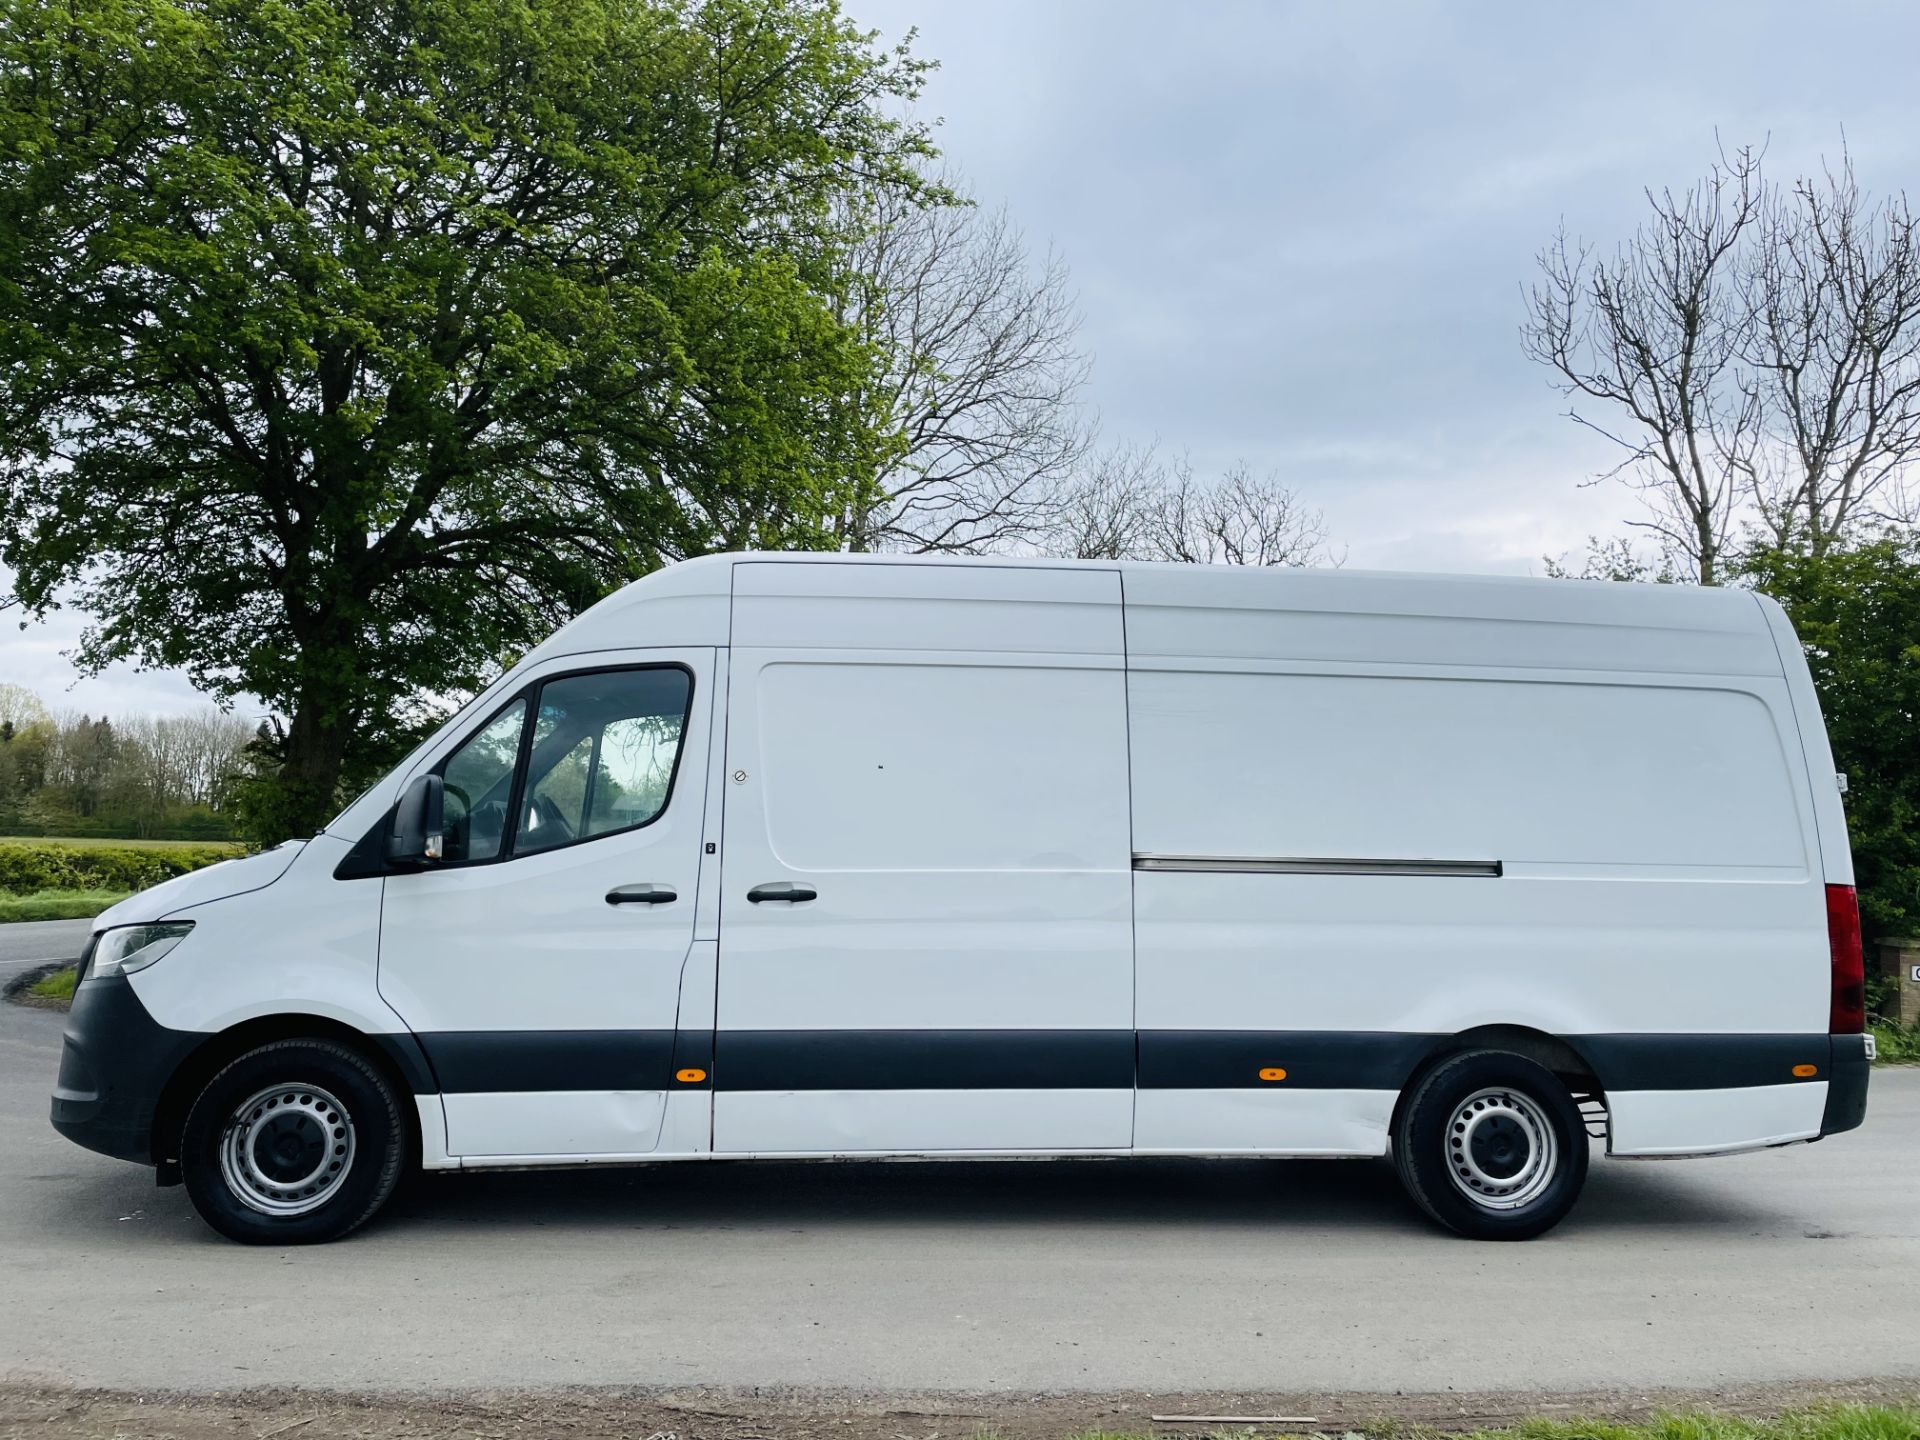 (ON SALE) MERCEDES SPRINTER 314CDI "LWB" HIGH ROOF (19 REG) EURO 6 - ONLY 83K MILES - CRUISE CONTROL - Image 7 of 17